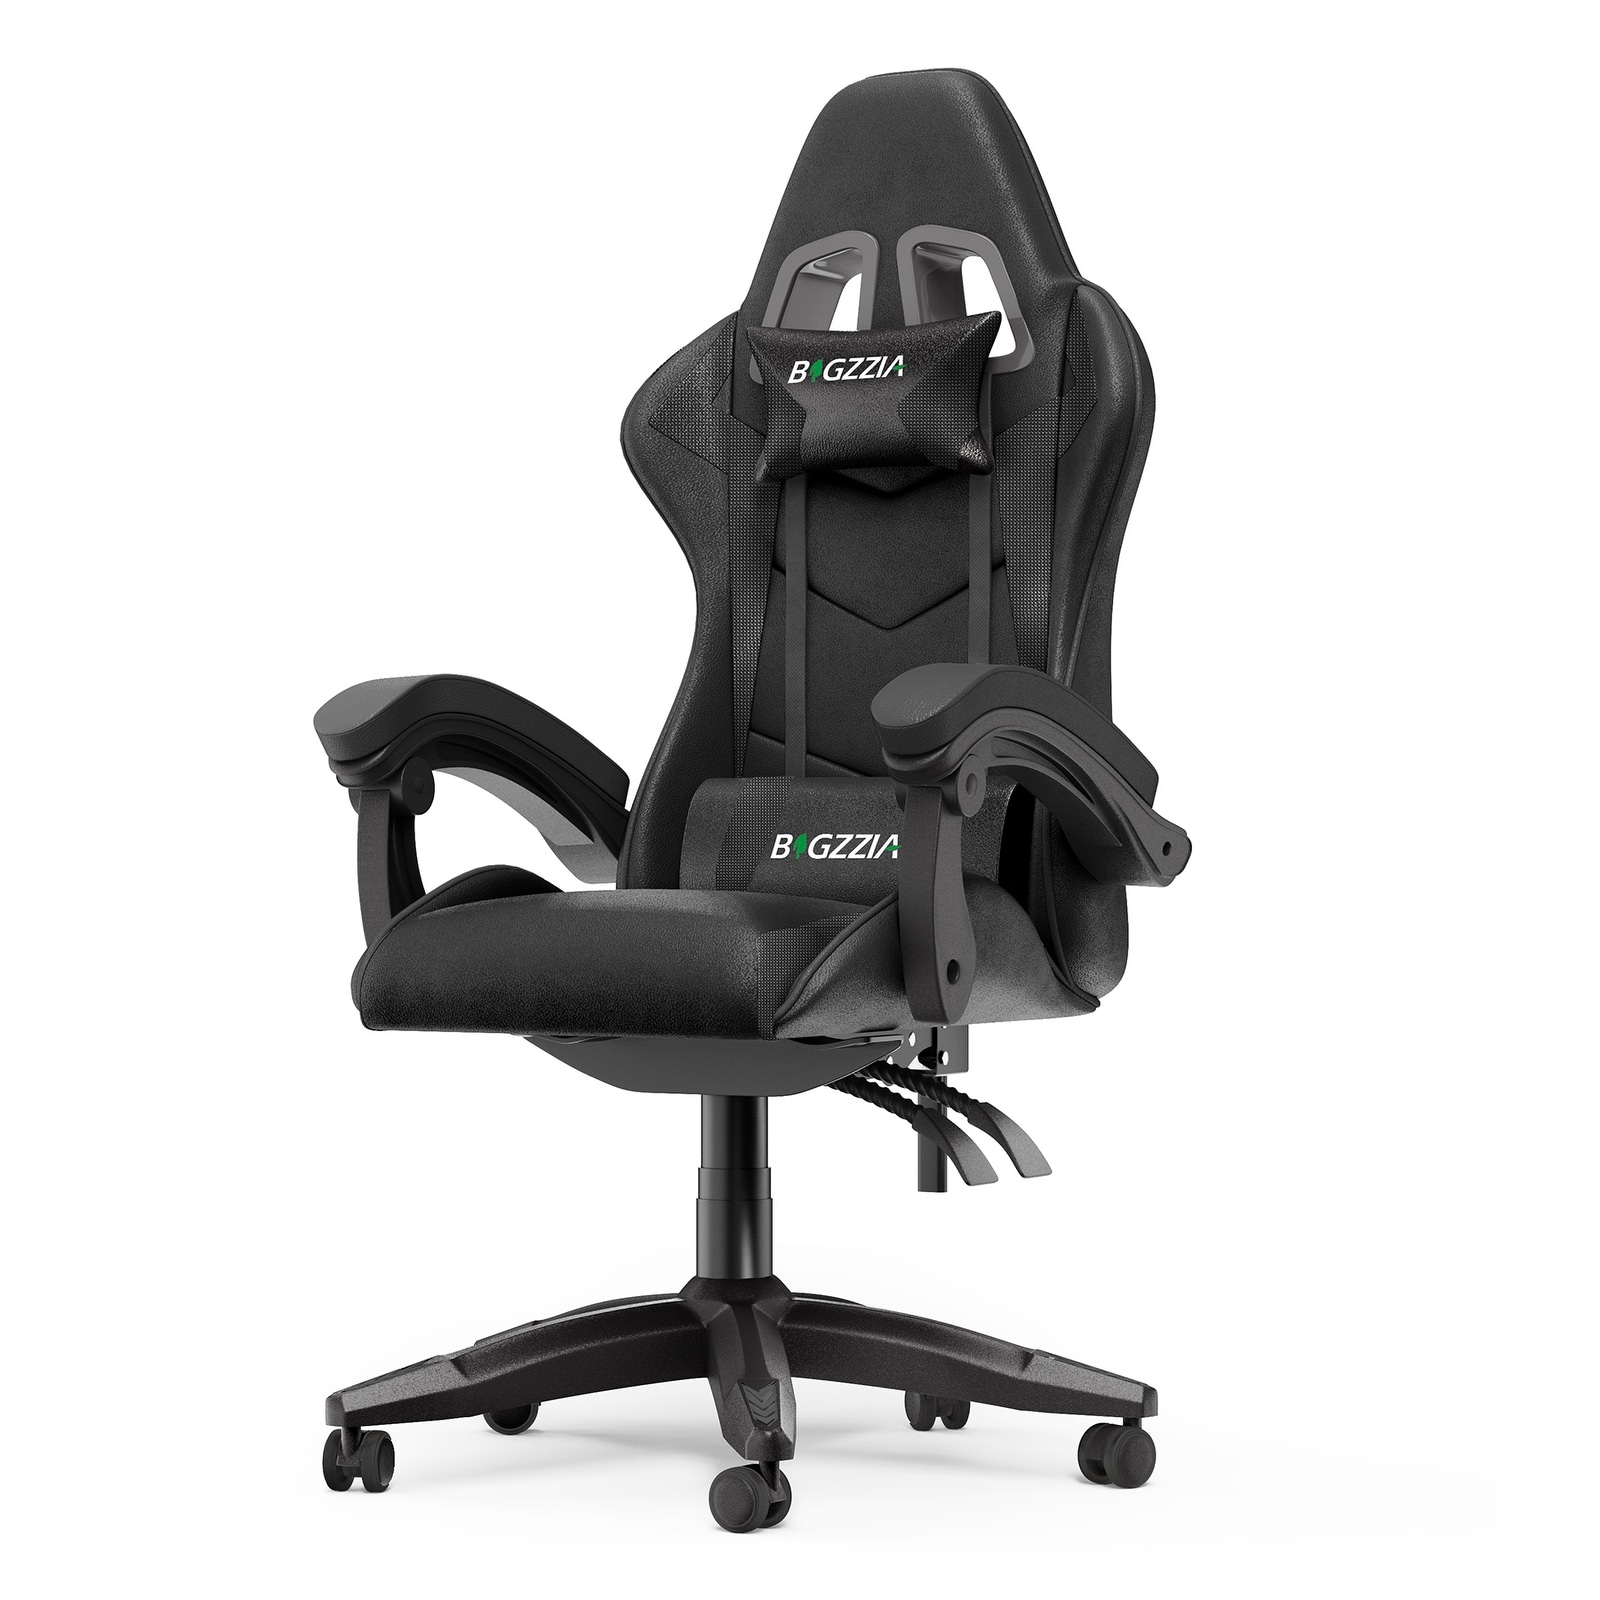 https://ak1.ostkcdn.com/images/products/is/images/direct/091da45989efcf2dcdeba7331d19e5adf3e6c7b3/Ergonomic-Gaming-Chair-Reclining-High-Back-Swivel-Rolling-Computer-Desk-Chair-with-Headrest-and-Lumbar-Support.jpg